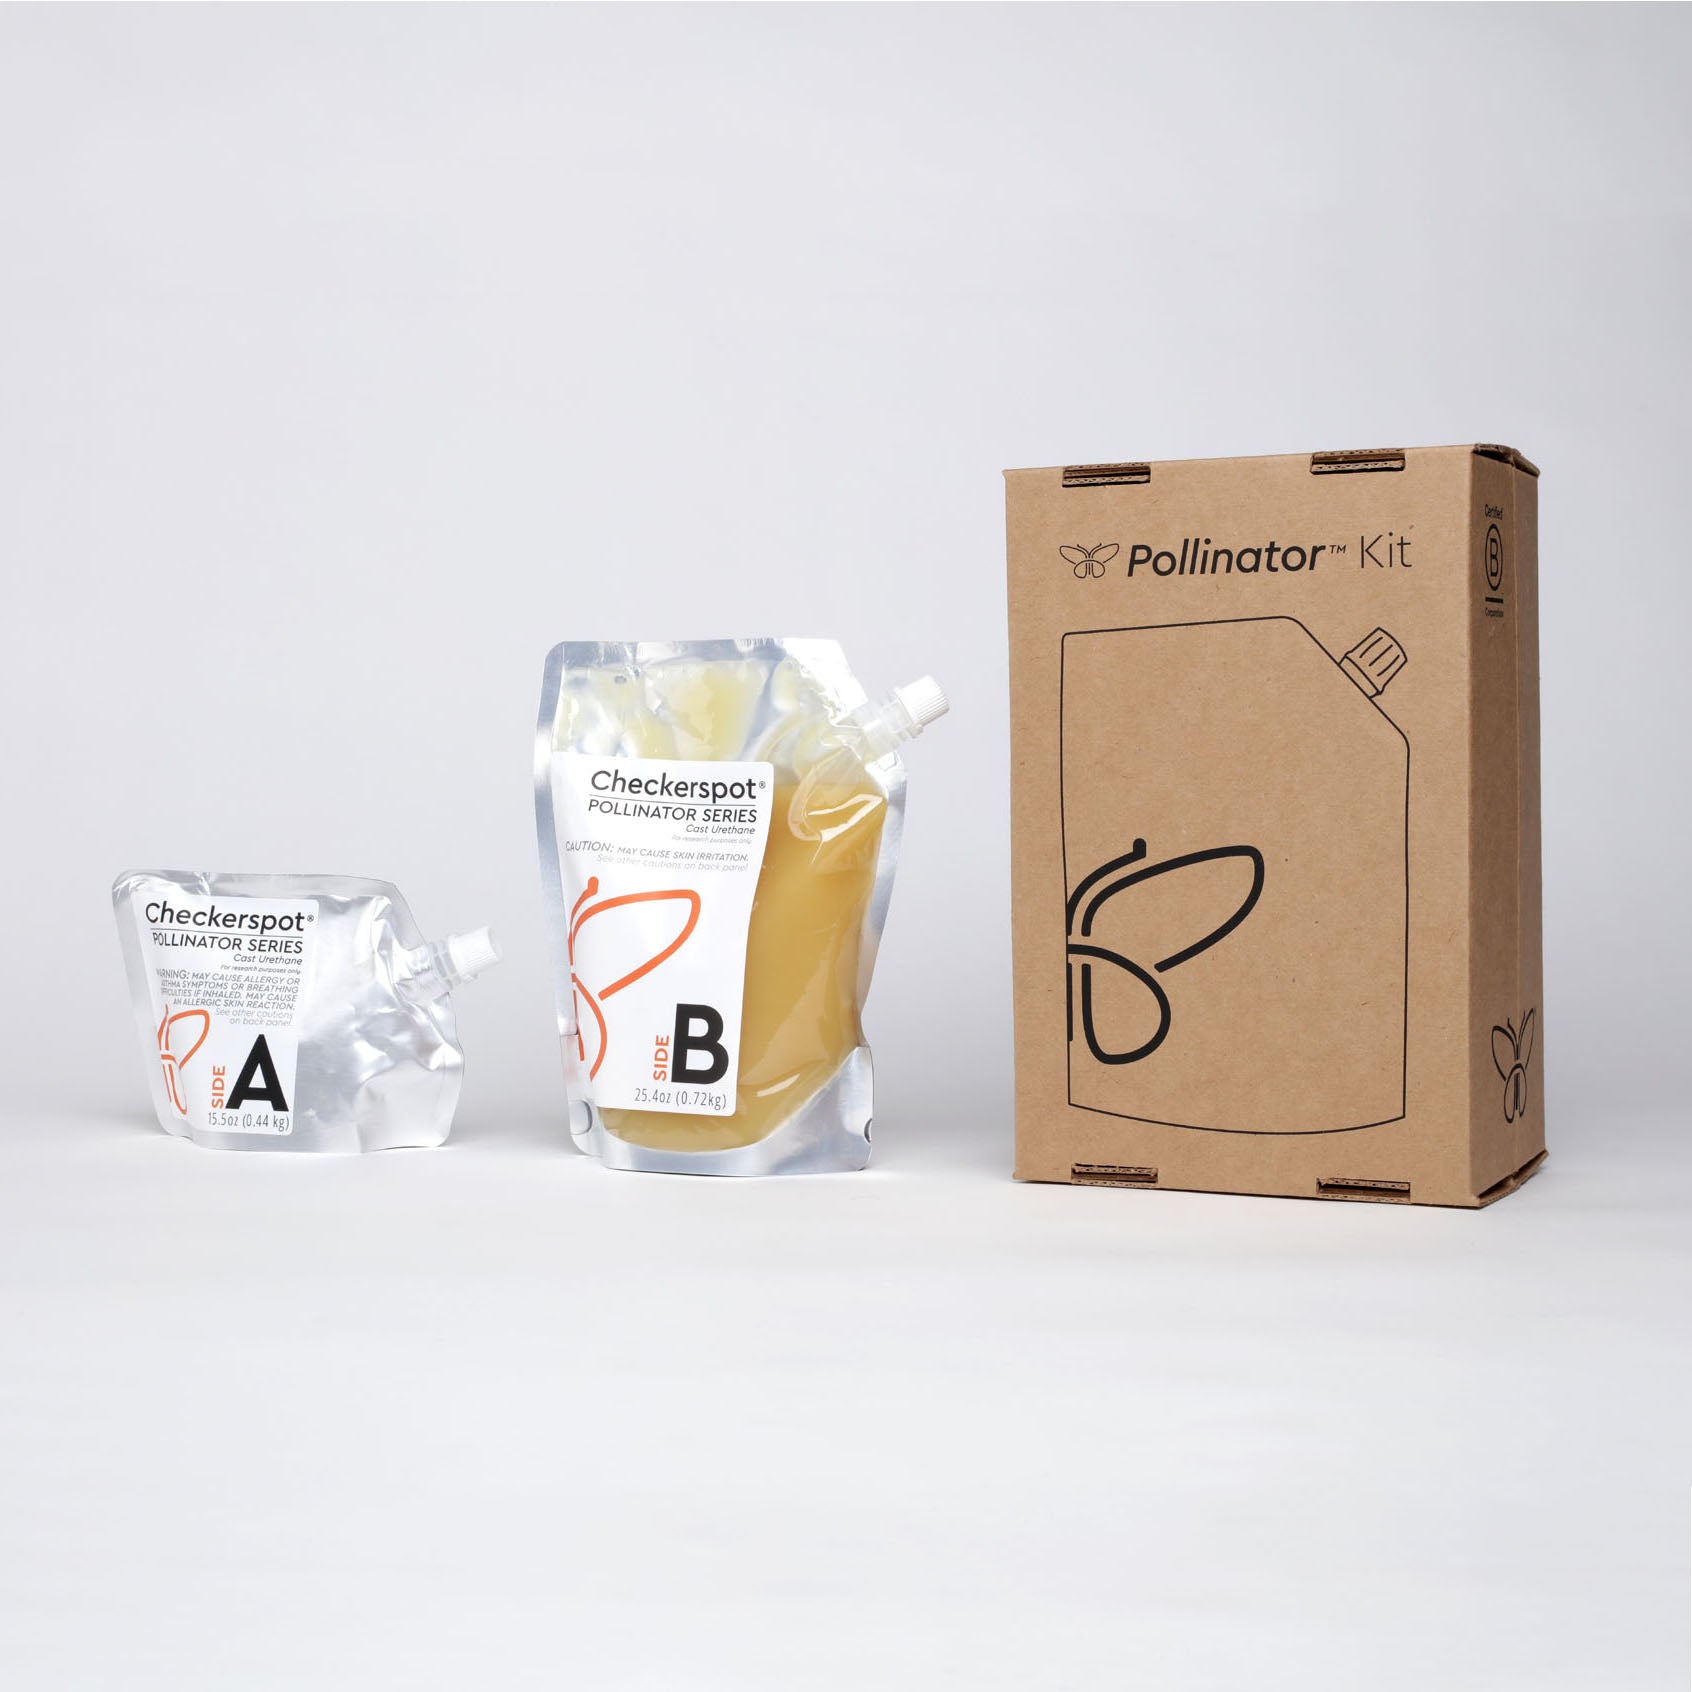 Photo: Two pouches and a box on a white background. To the right is a brown cardboard box with "Pollinator™ Kit" printed on it in black and a line drawing of a flexible pouch and a butterfly logo on it in black. On the box spine it says "Certified B Corporation". In the center is a clear and aluminum flexible pouch with a white spout. It has a label that says "Side B" with a beeswax-colored liquid material inside. On the left is a small aluminum spouted pouch that says "Side A".